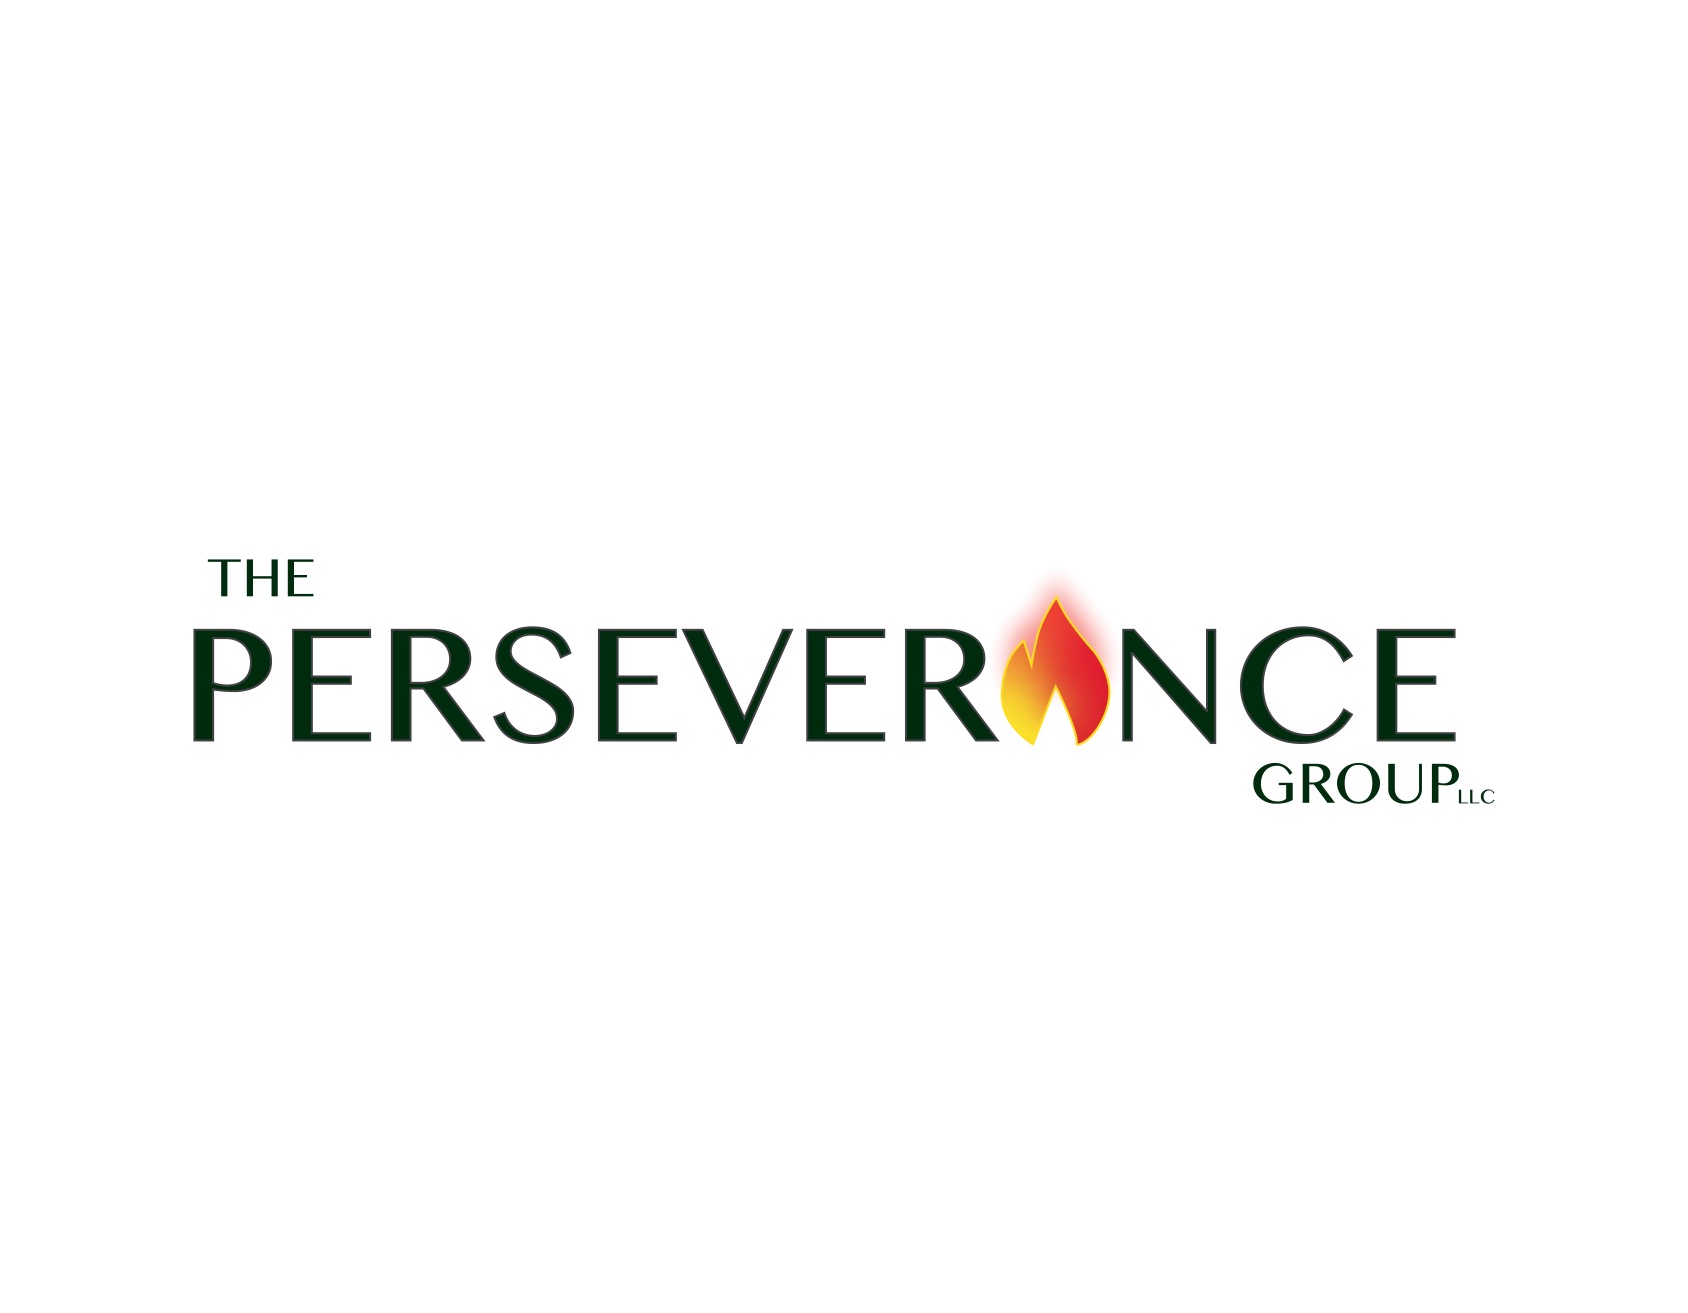 The Perseverance Group LLC